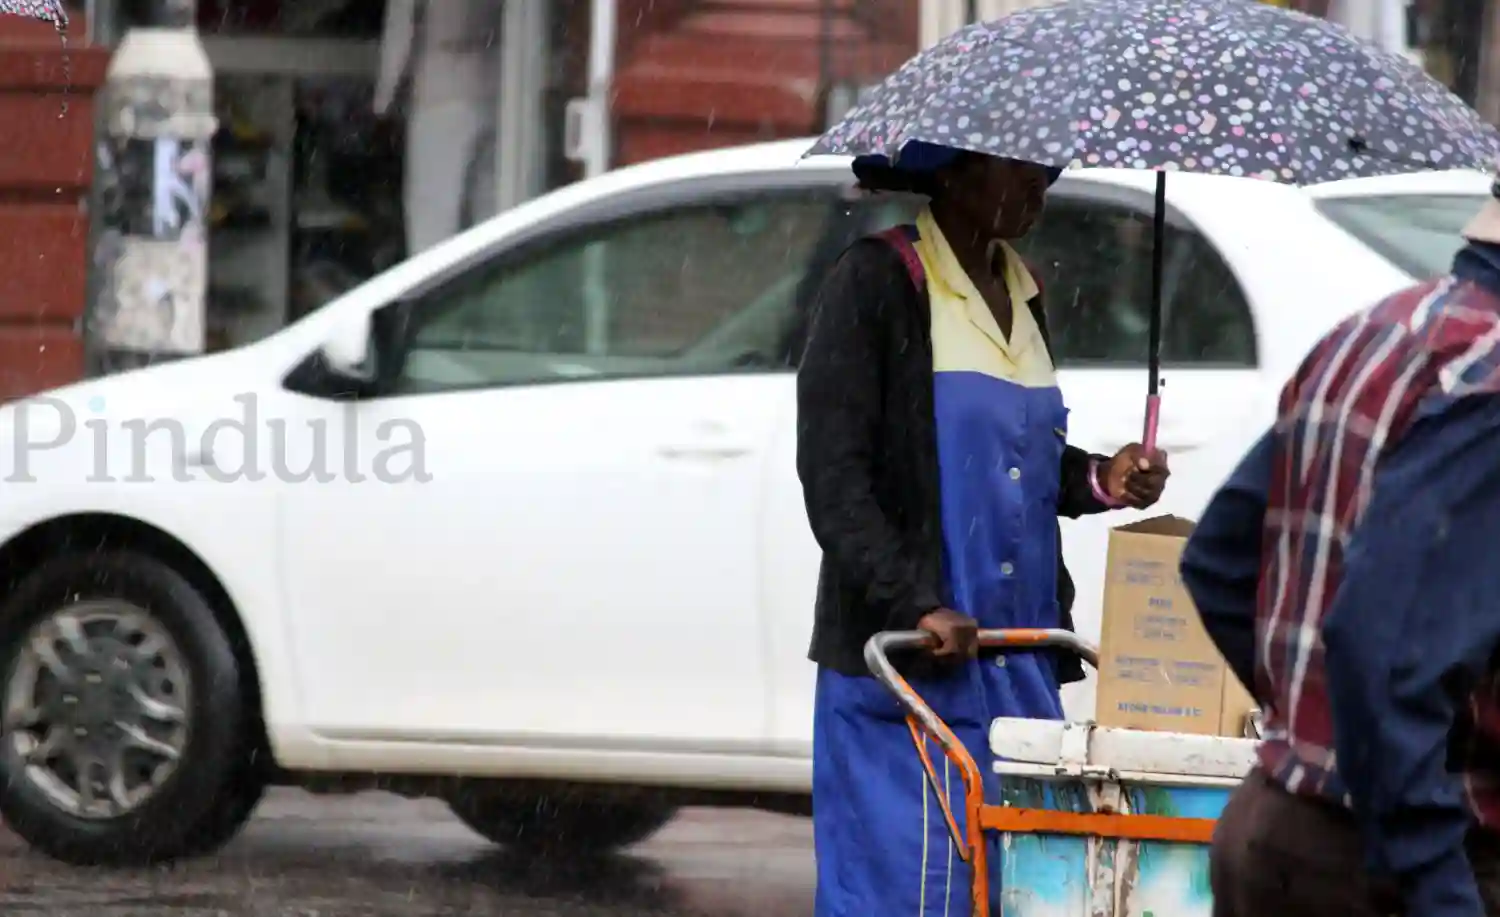 Heavy Rains Expected Across The Whole Country